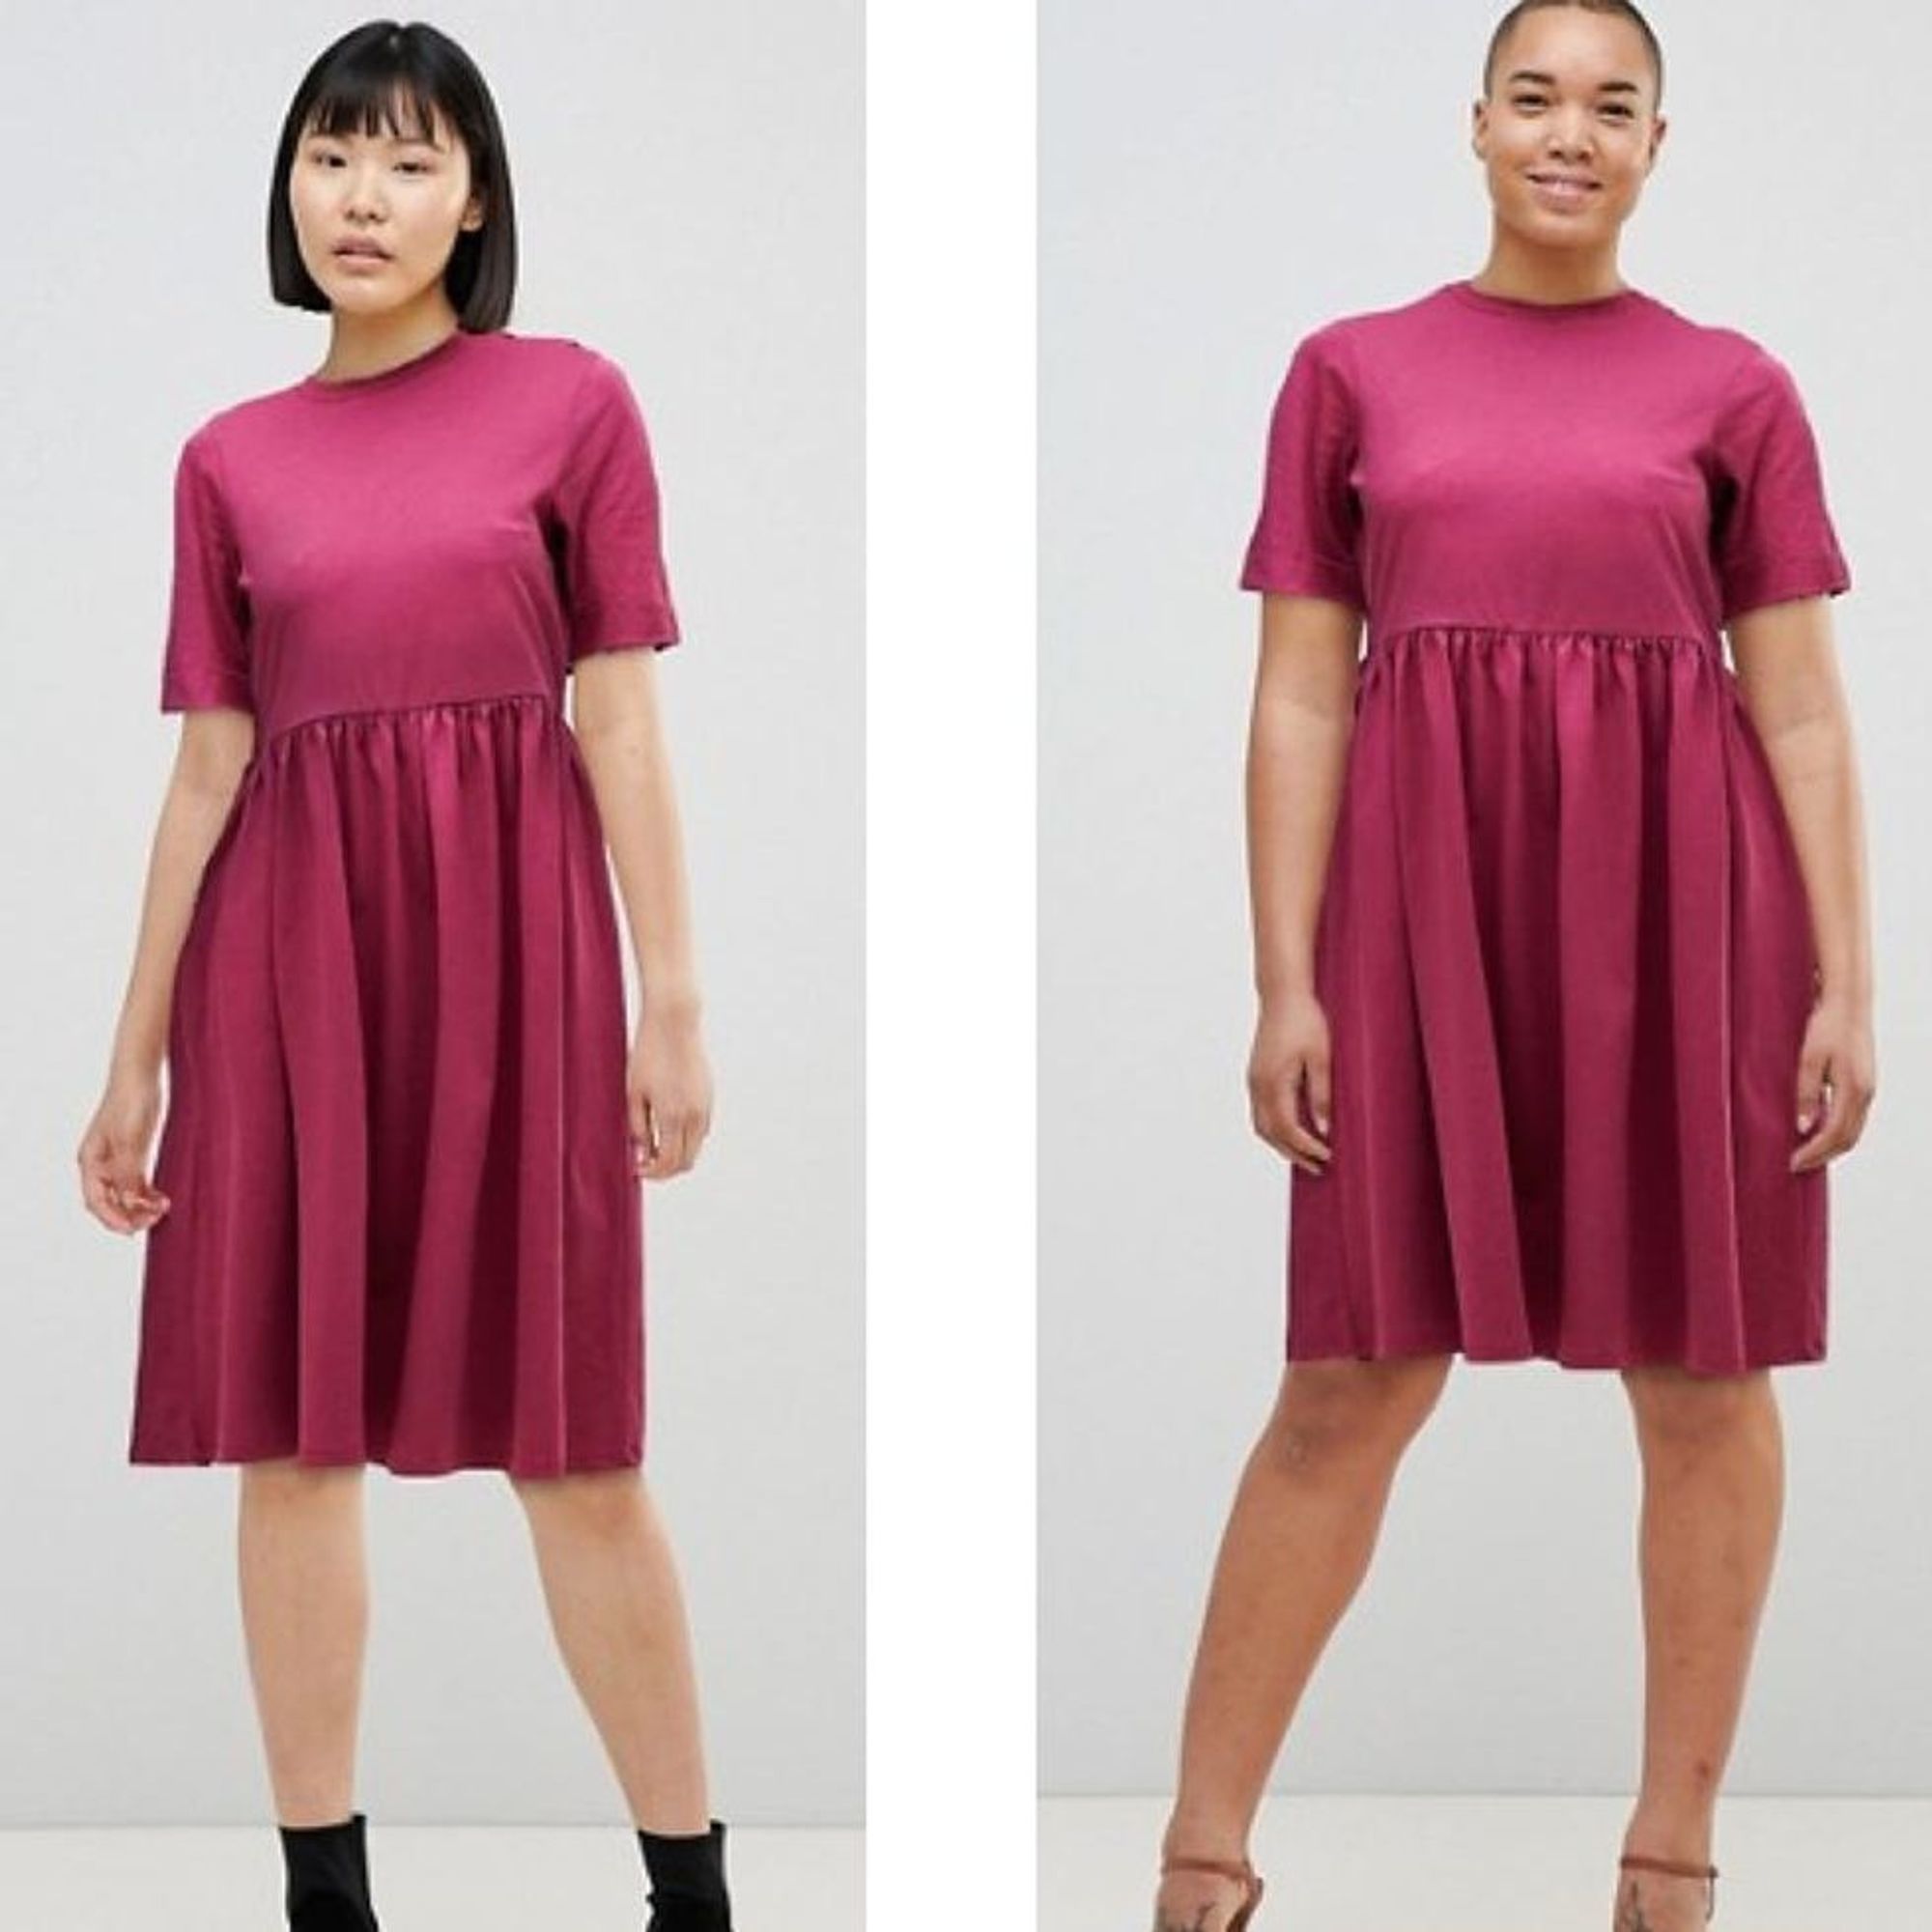 ASOS' Revolutionary New App Allows You to See How Clothing ...